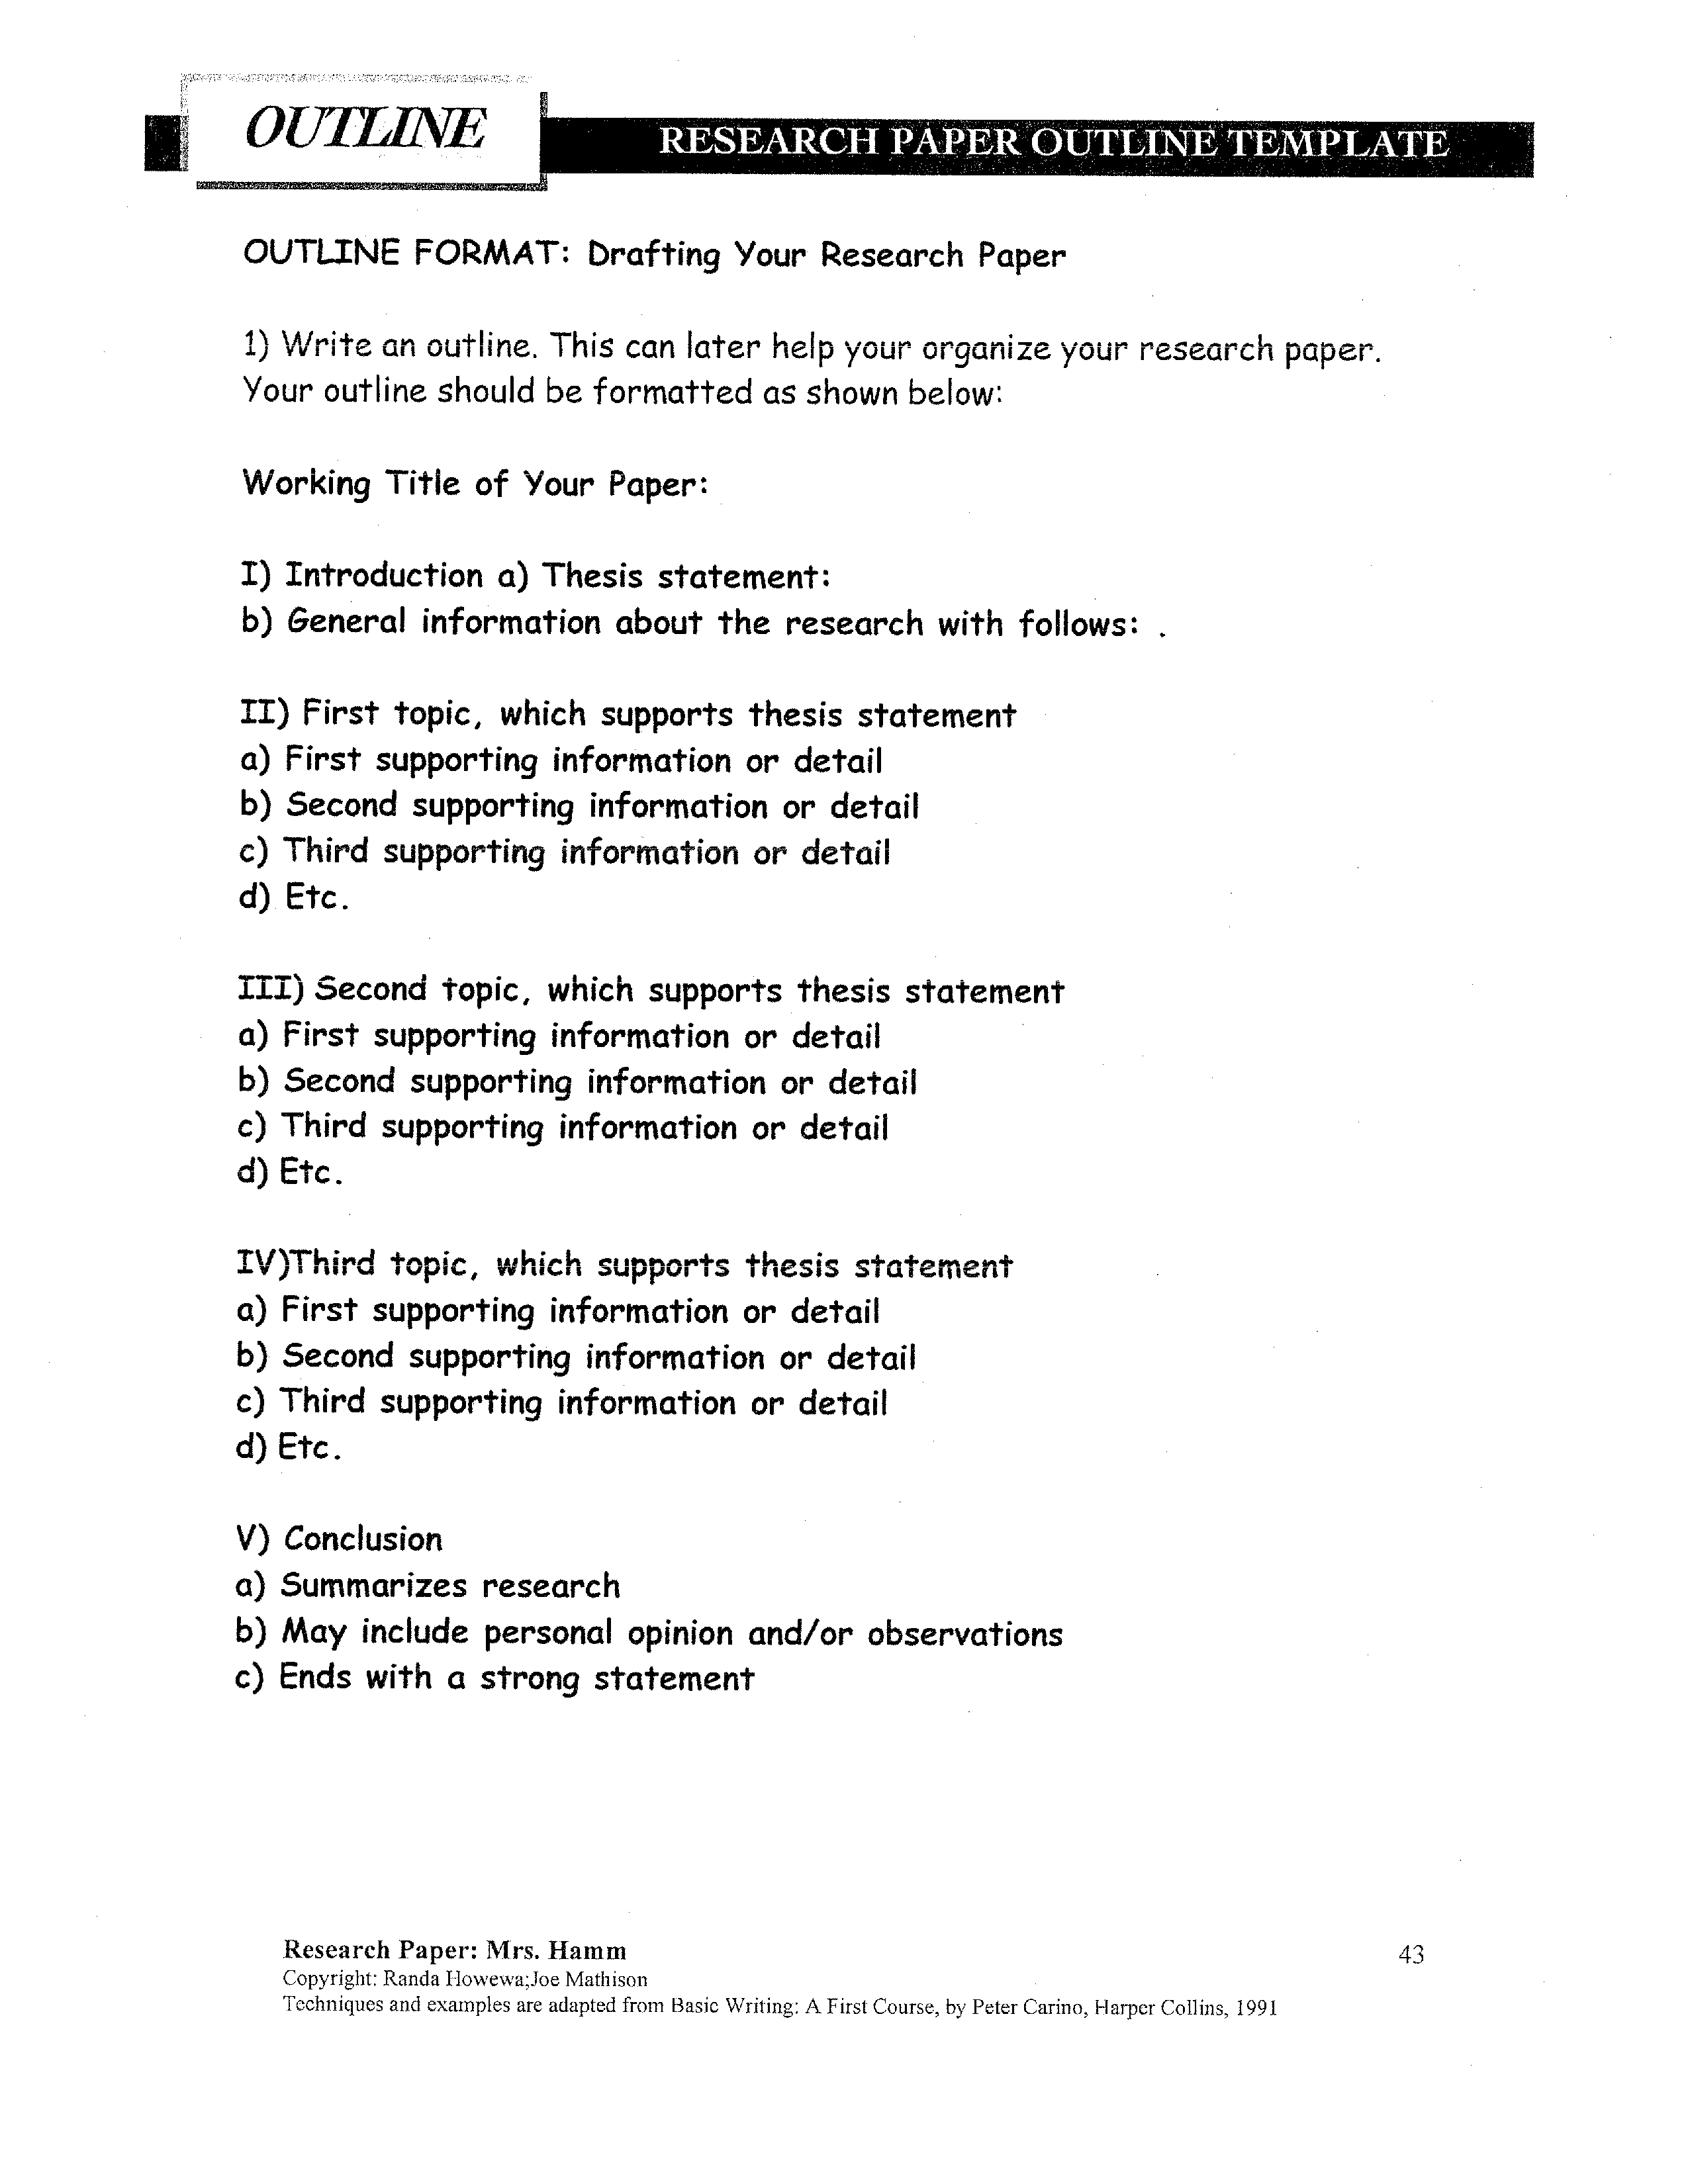 Research Paper Outline Format Blank Sample  Templates at